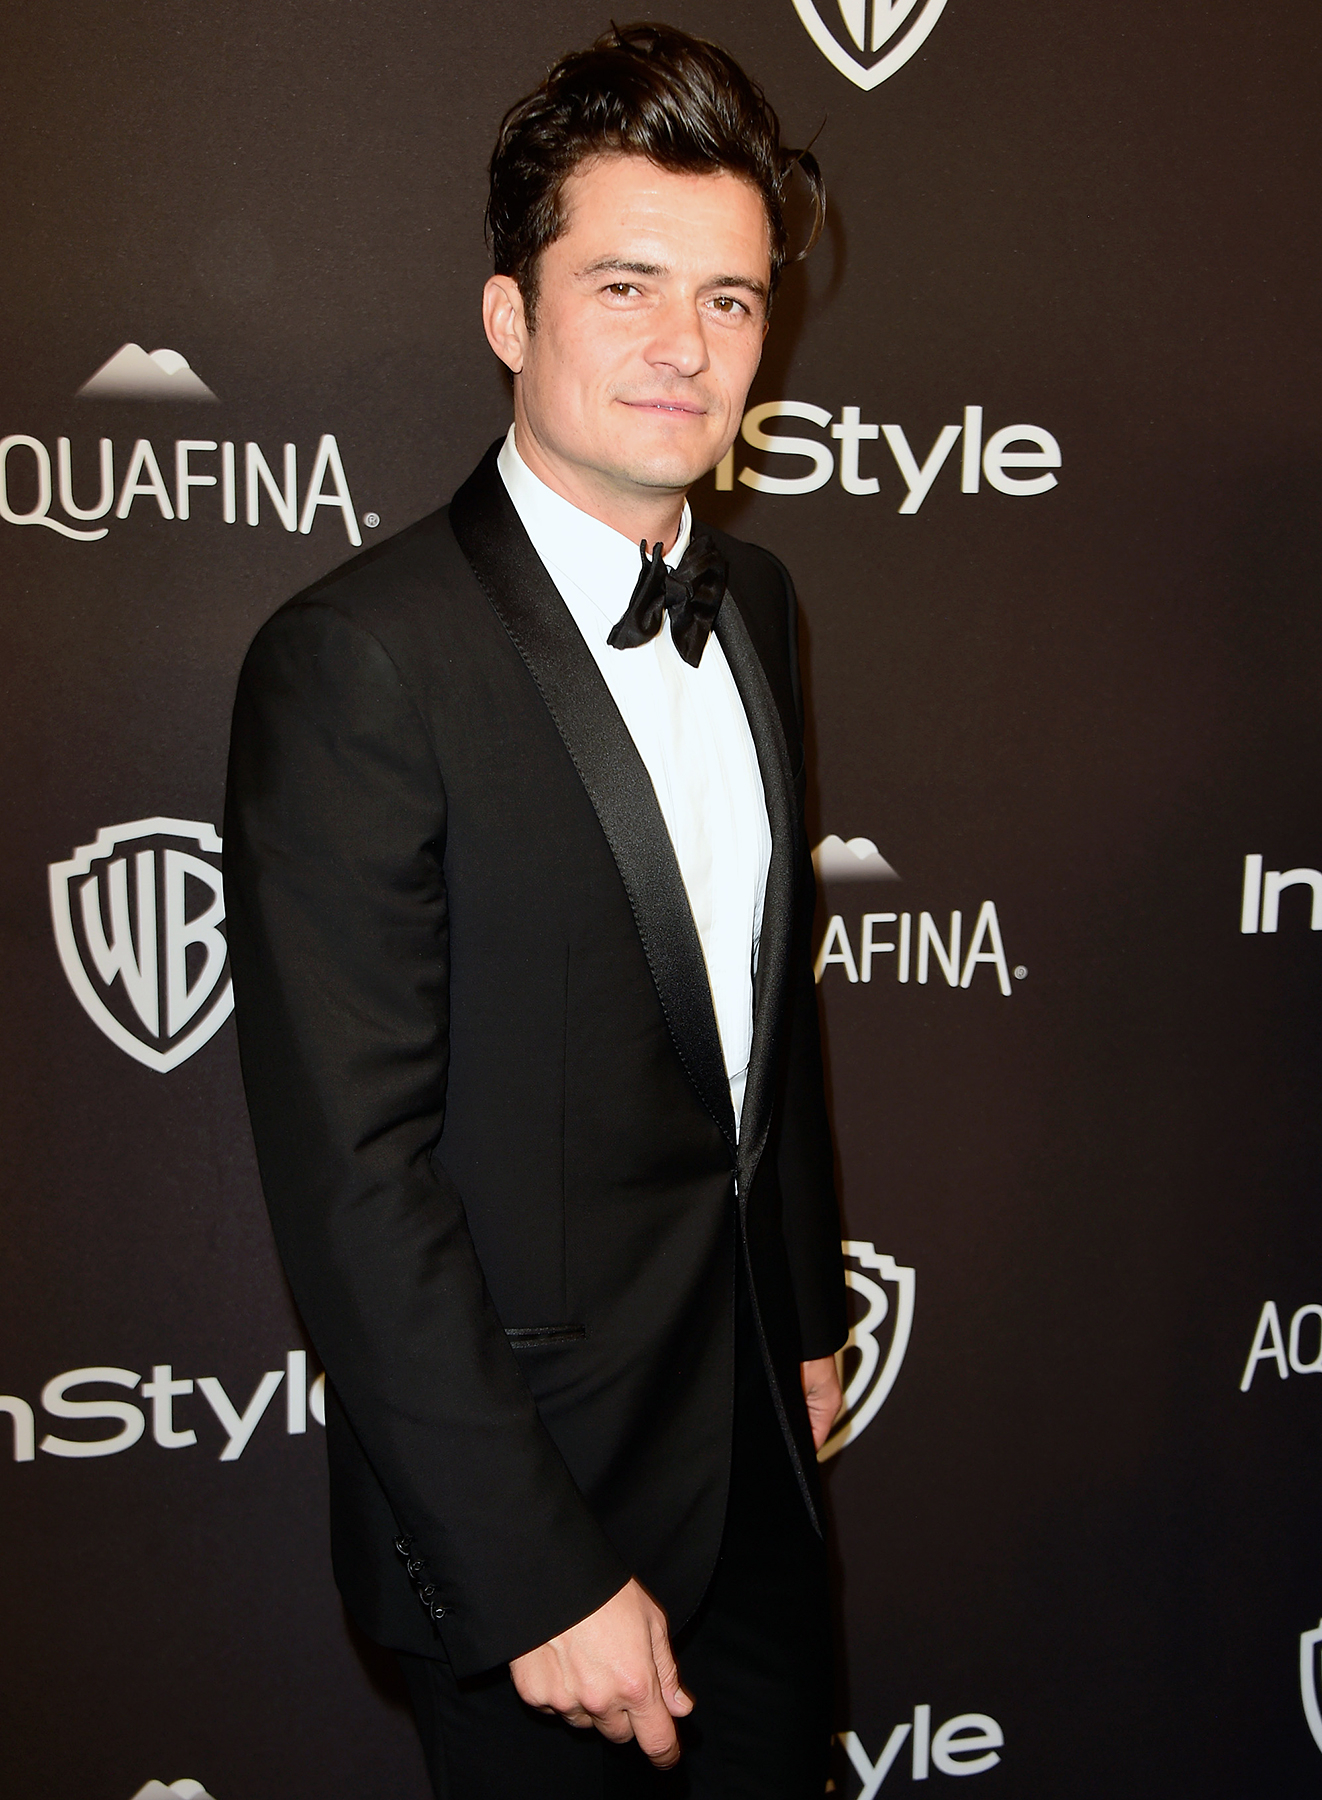 Orlando Bloom Was Surprised by Nude Paddle Boarding Photos